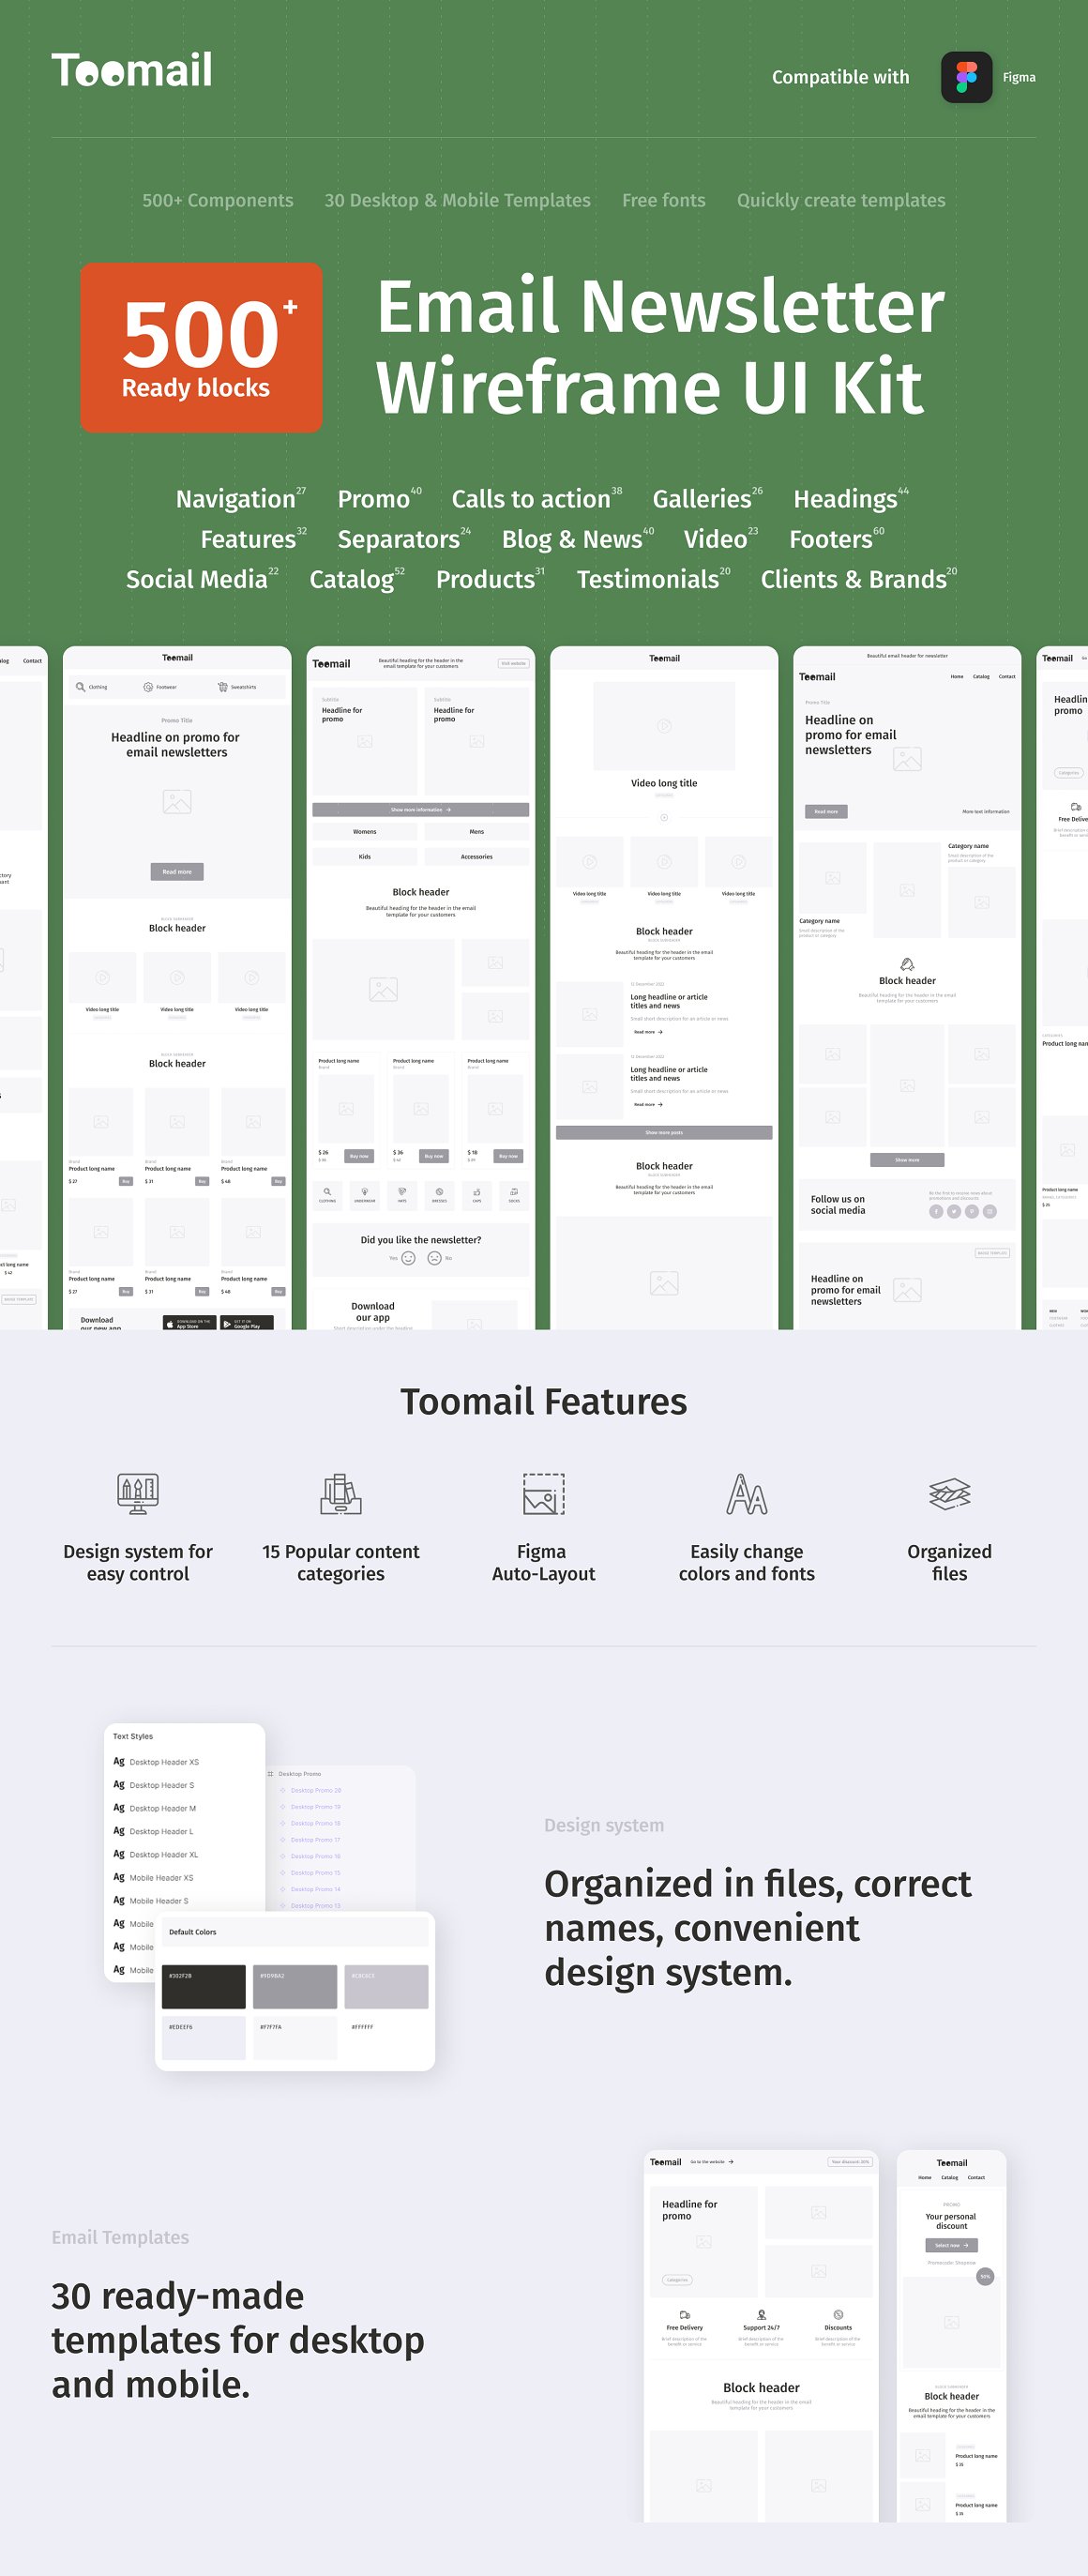 A collection of images of wonderful email newsletter wireframes.